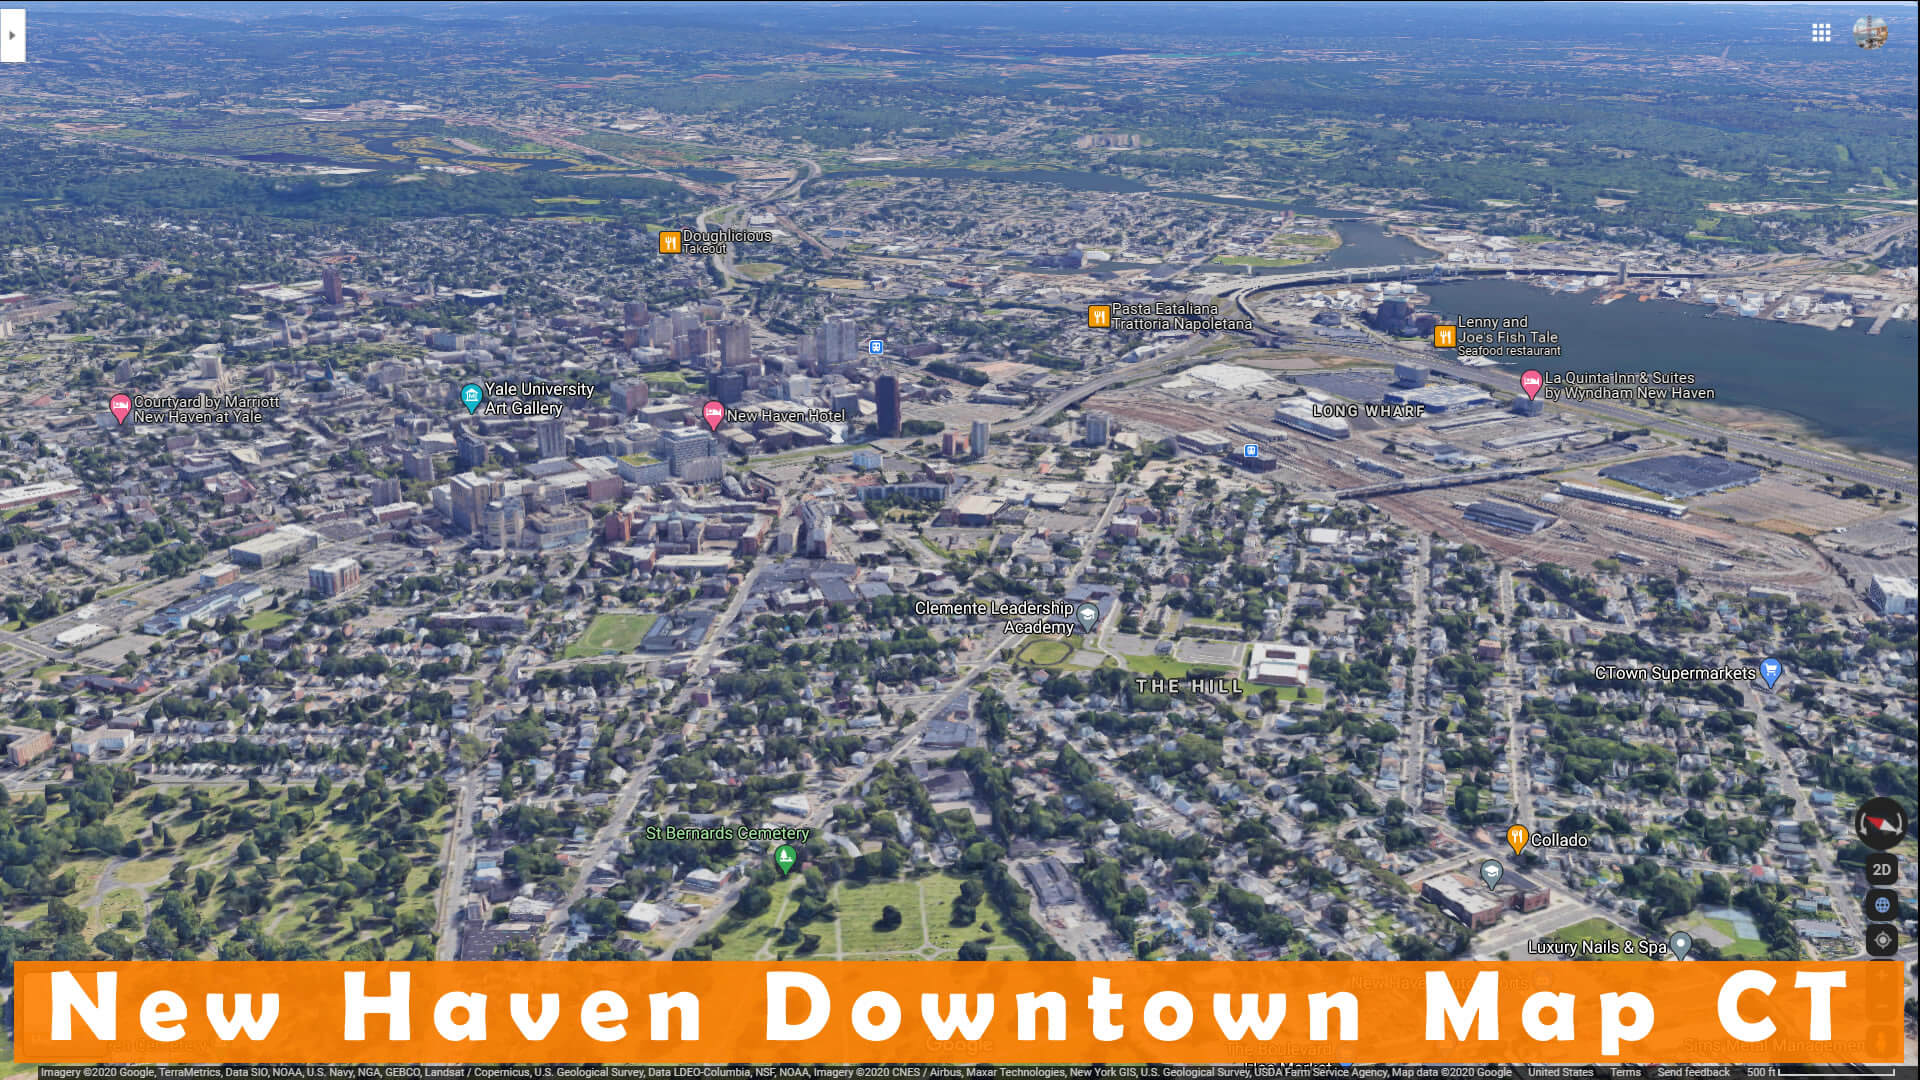 New Haven Downtown Map CT